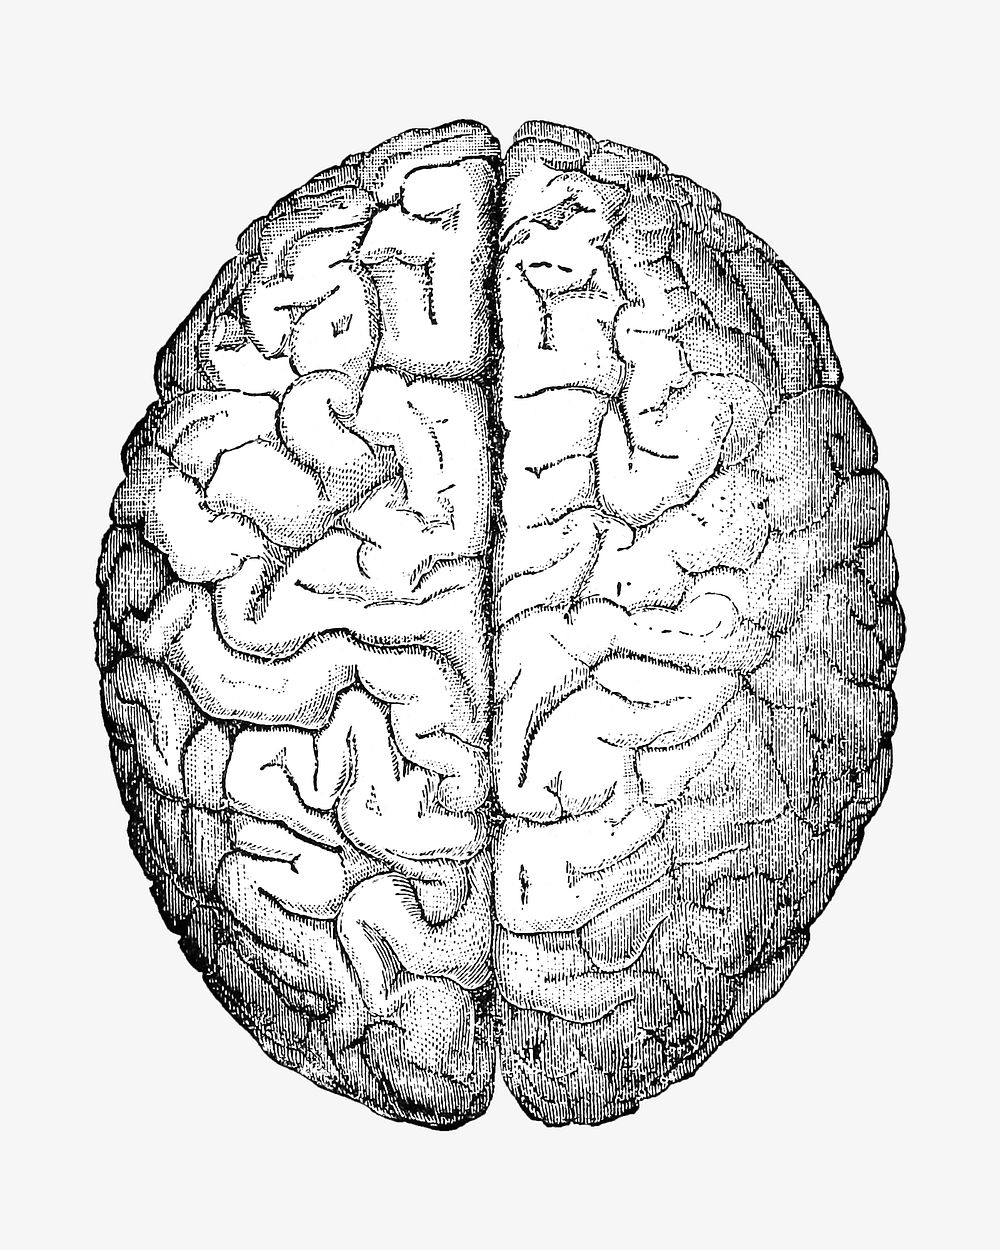 Brain illustration. Remixed by rawpixel.